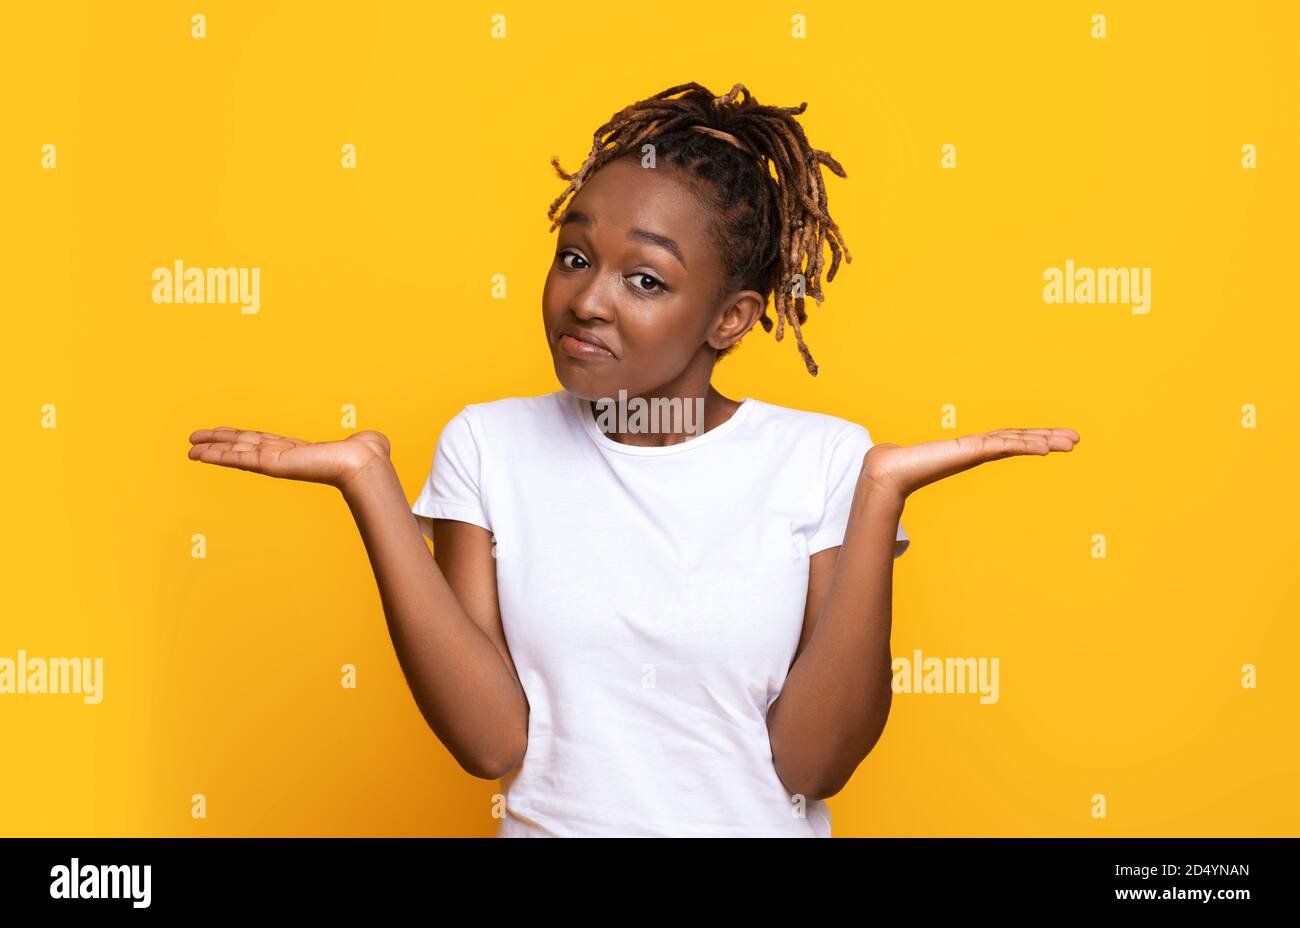 Confused black woman manraising her hands and looking at camera Stock Photo